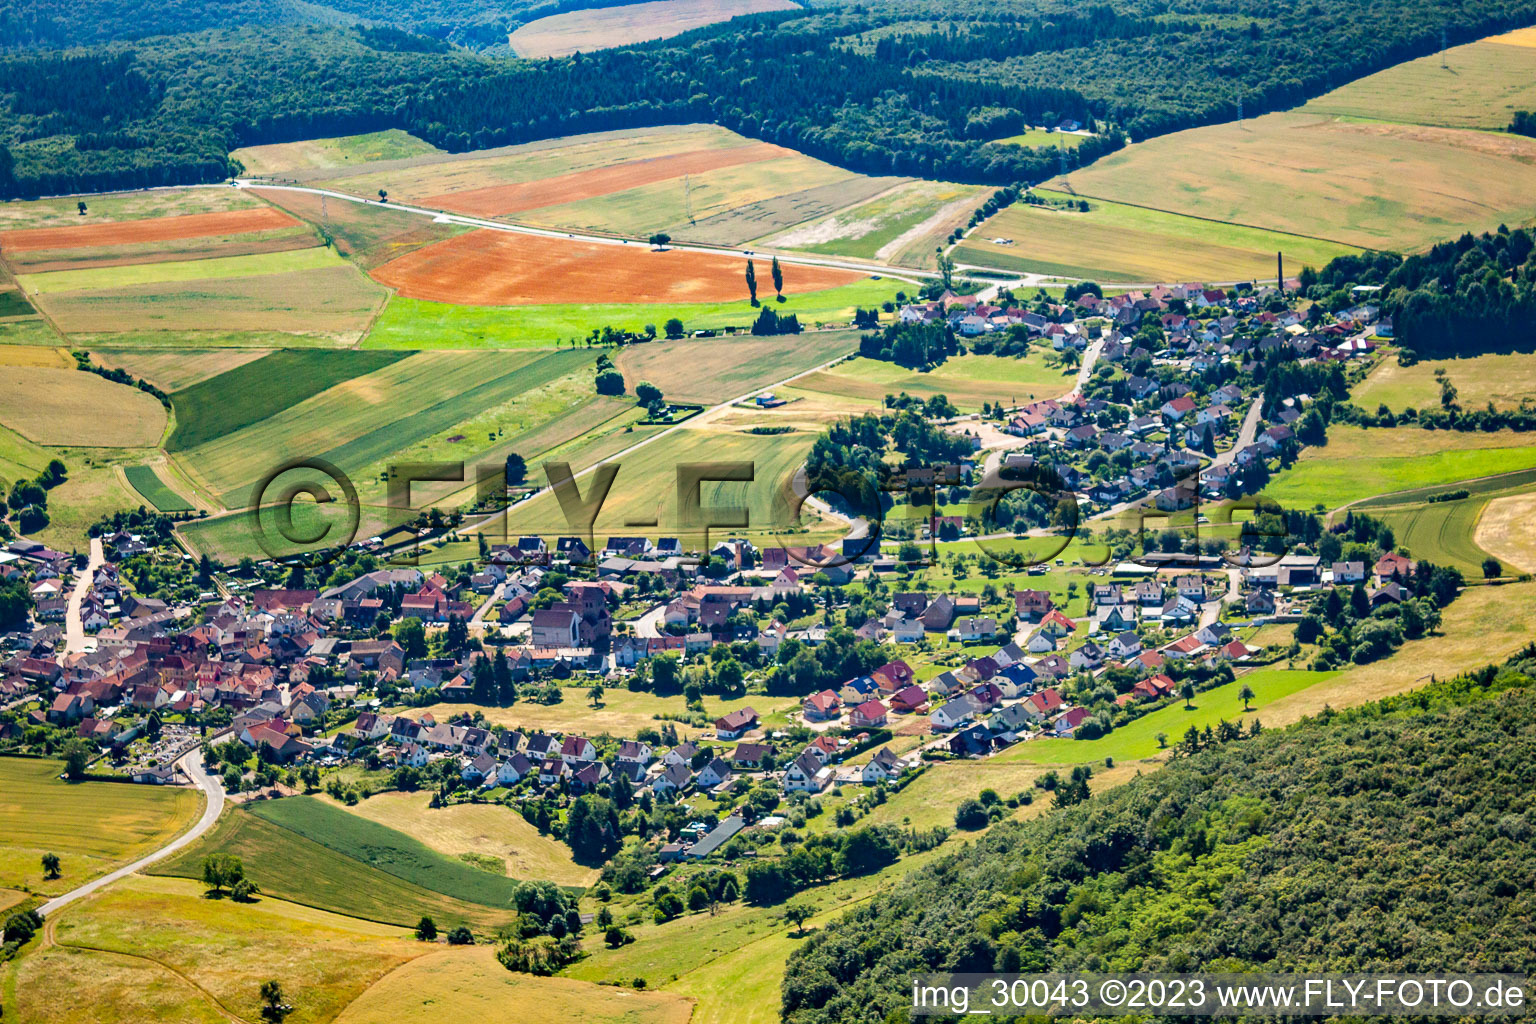 Aerial view of Hallgarten in the state Rhineland-Palatinate, Germany